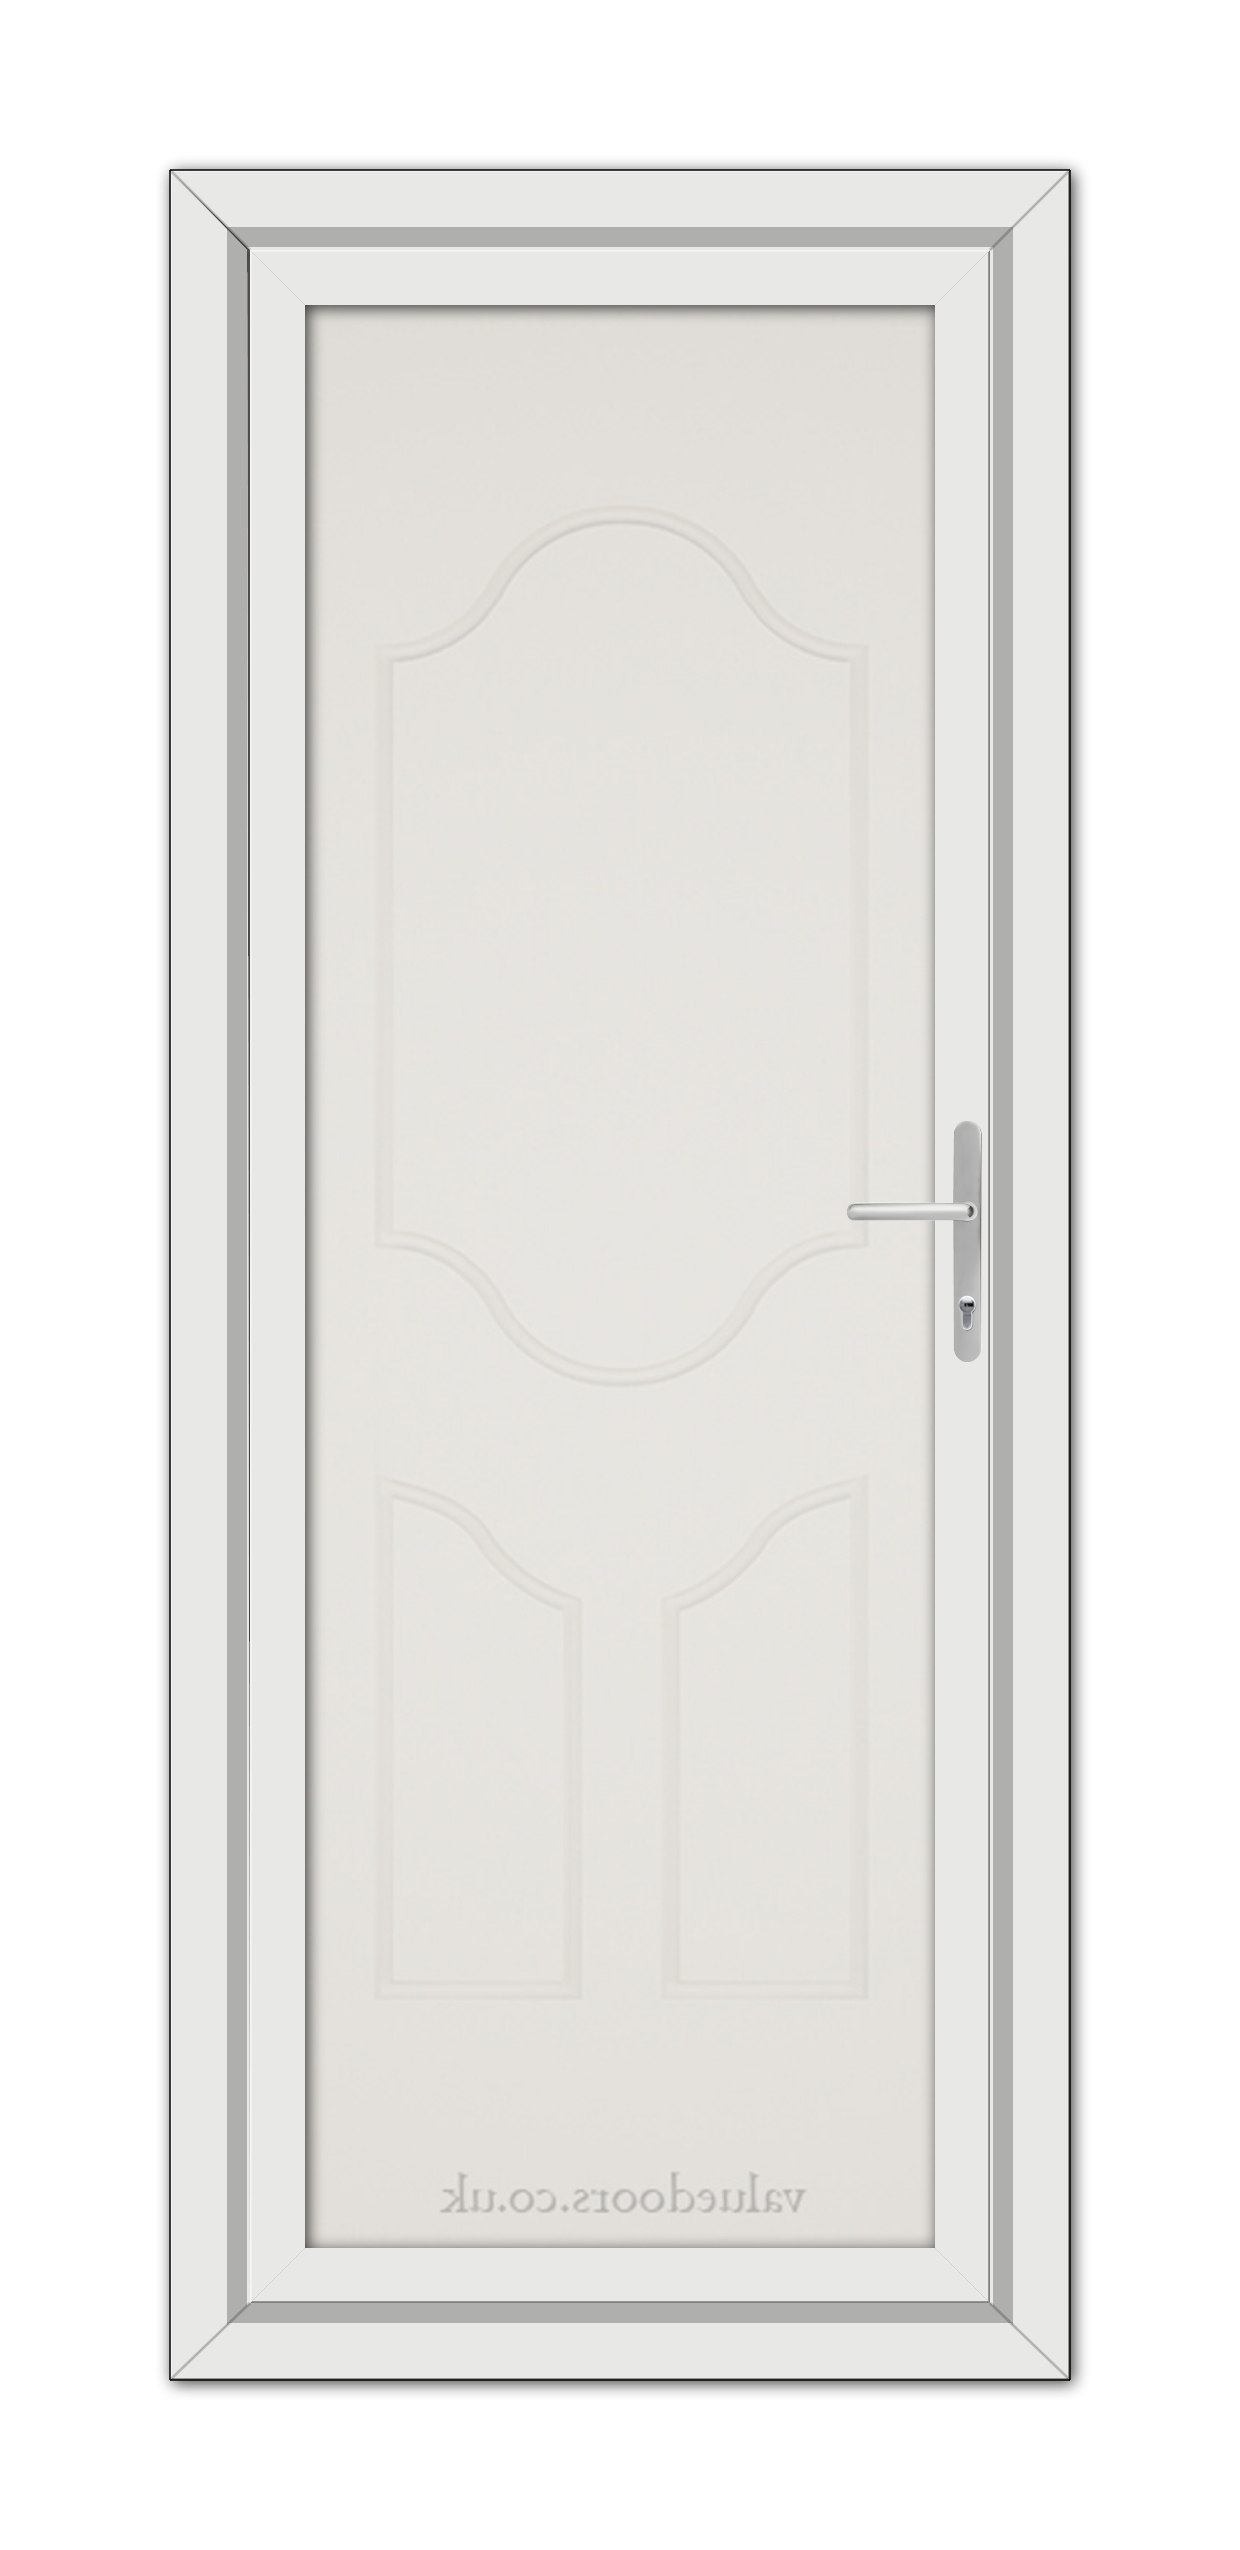 A White Cream Althorpe Solid uPVC Door with a silver handle.